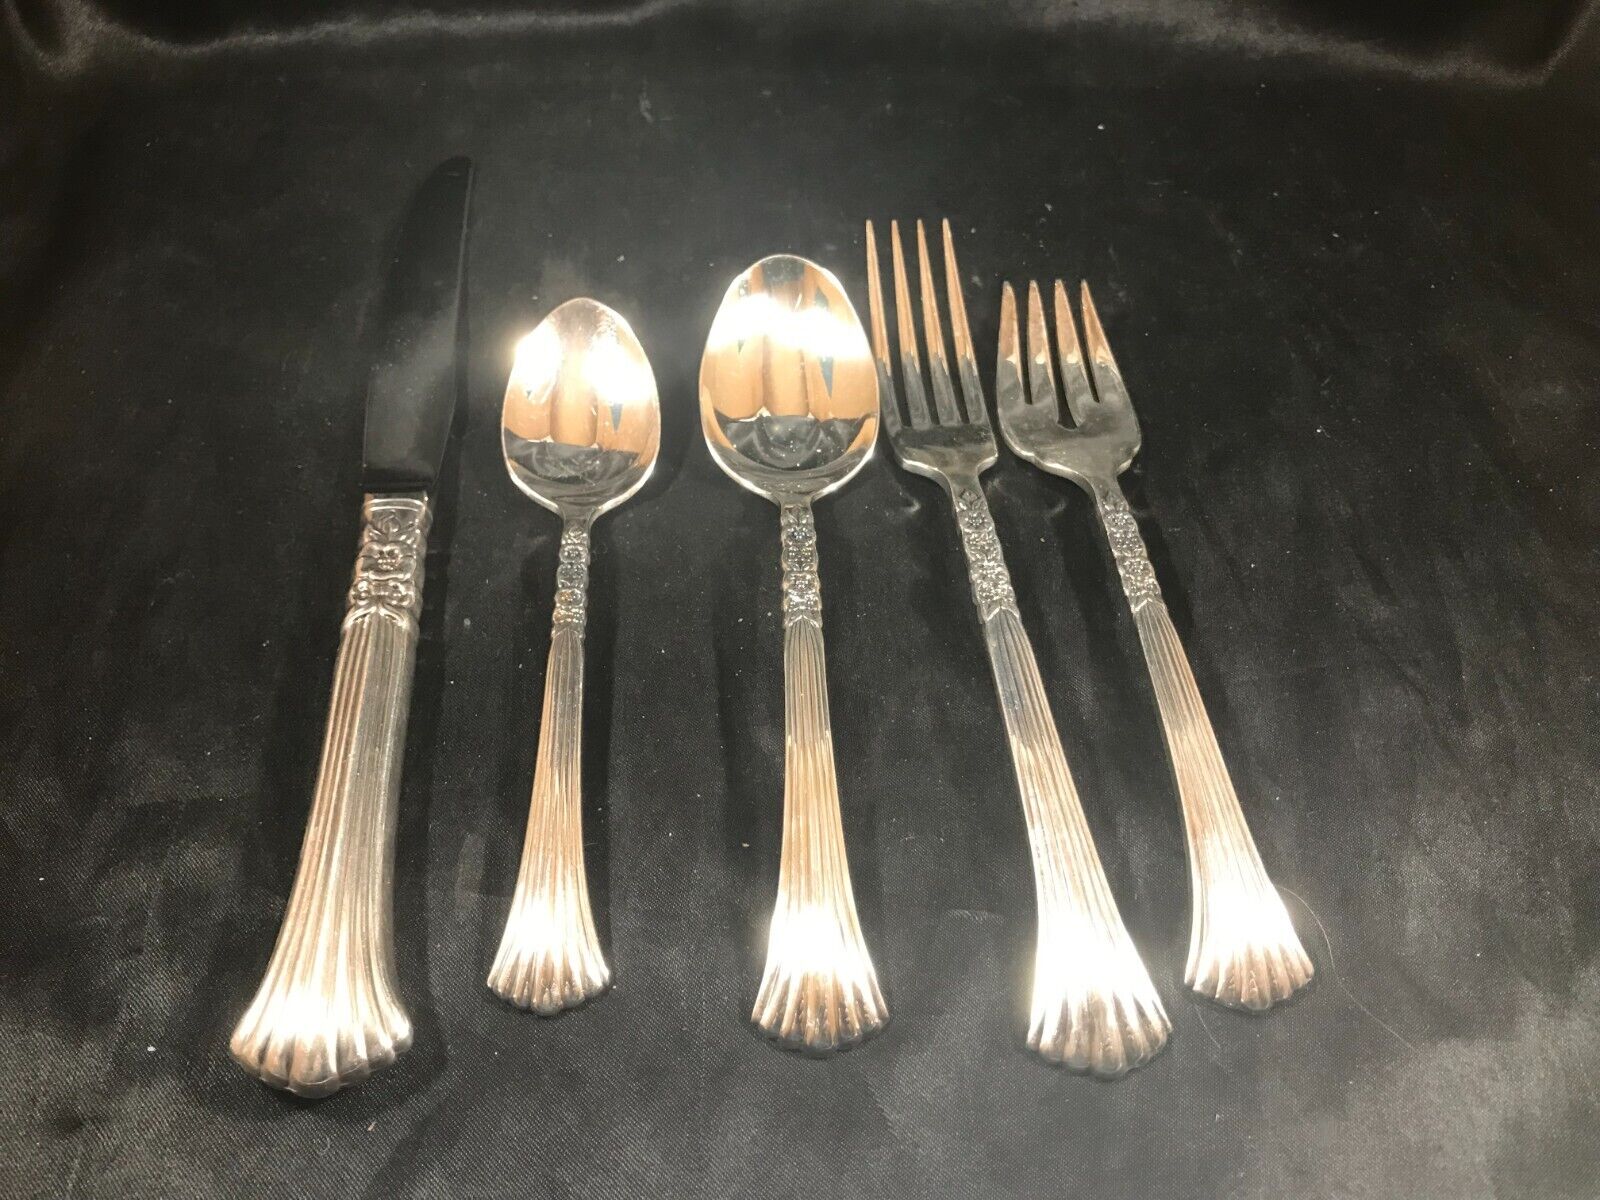 Vintage ONEIDA FLORAL QUEEN 5 Piece Place Setting Silverplate Flatware